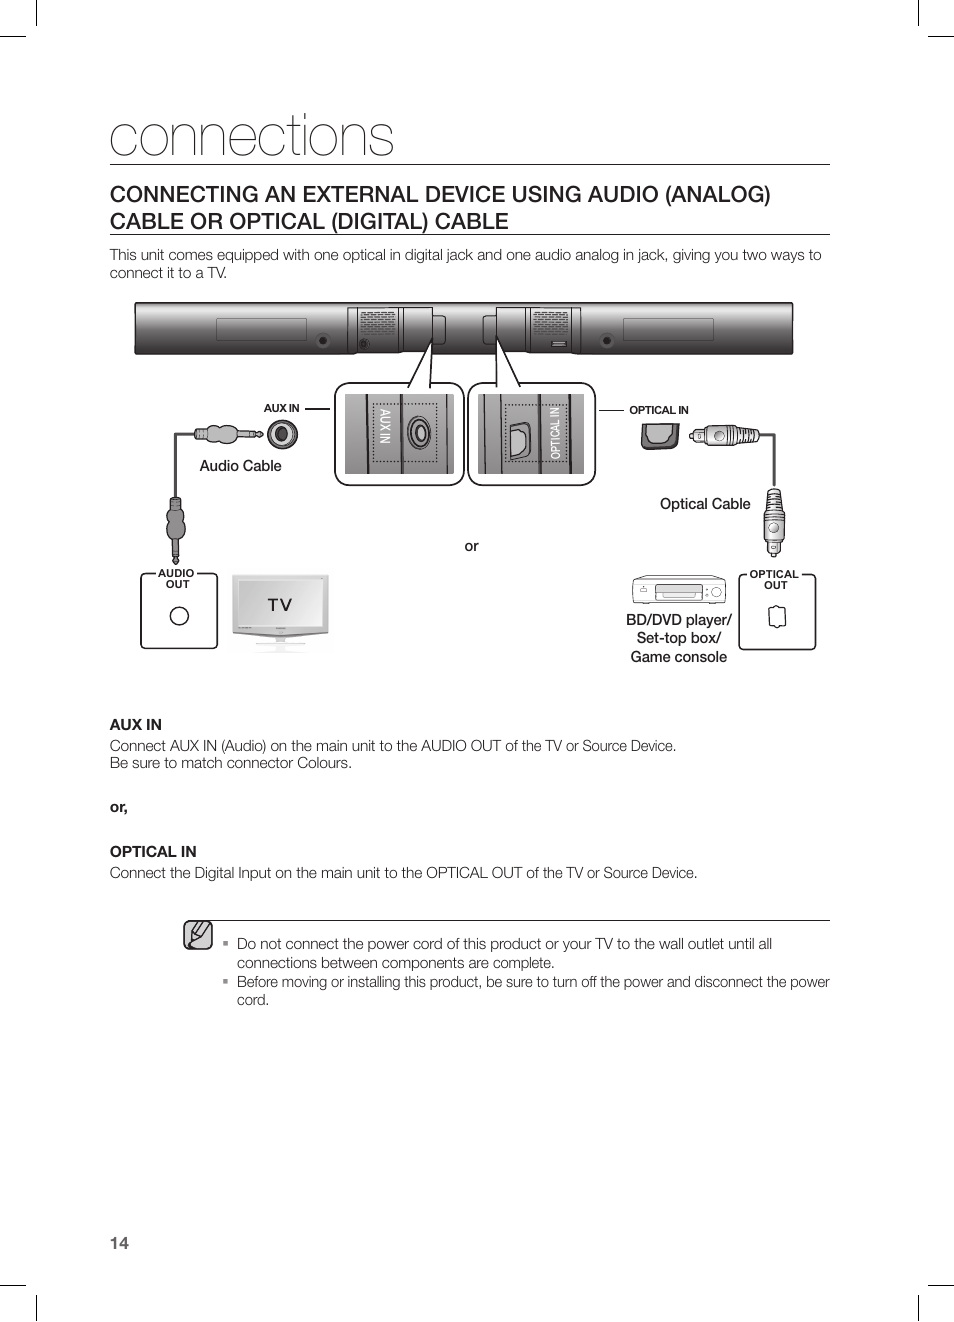 Connections | Samsung HW-FM55C-ZA User Manual | Page 14 / 26